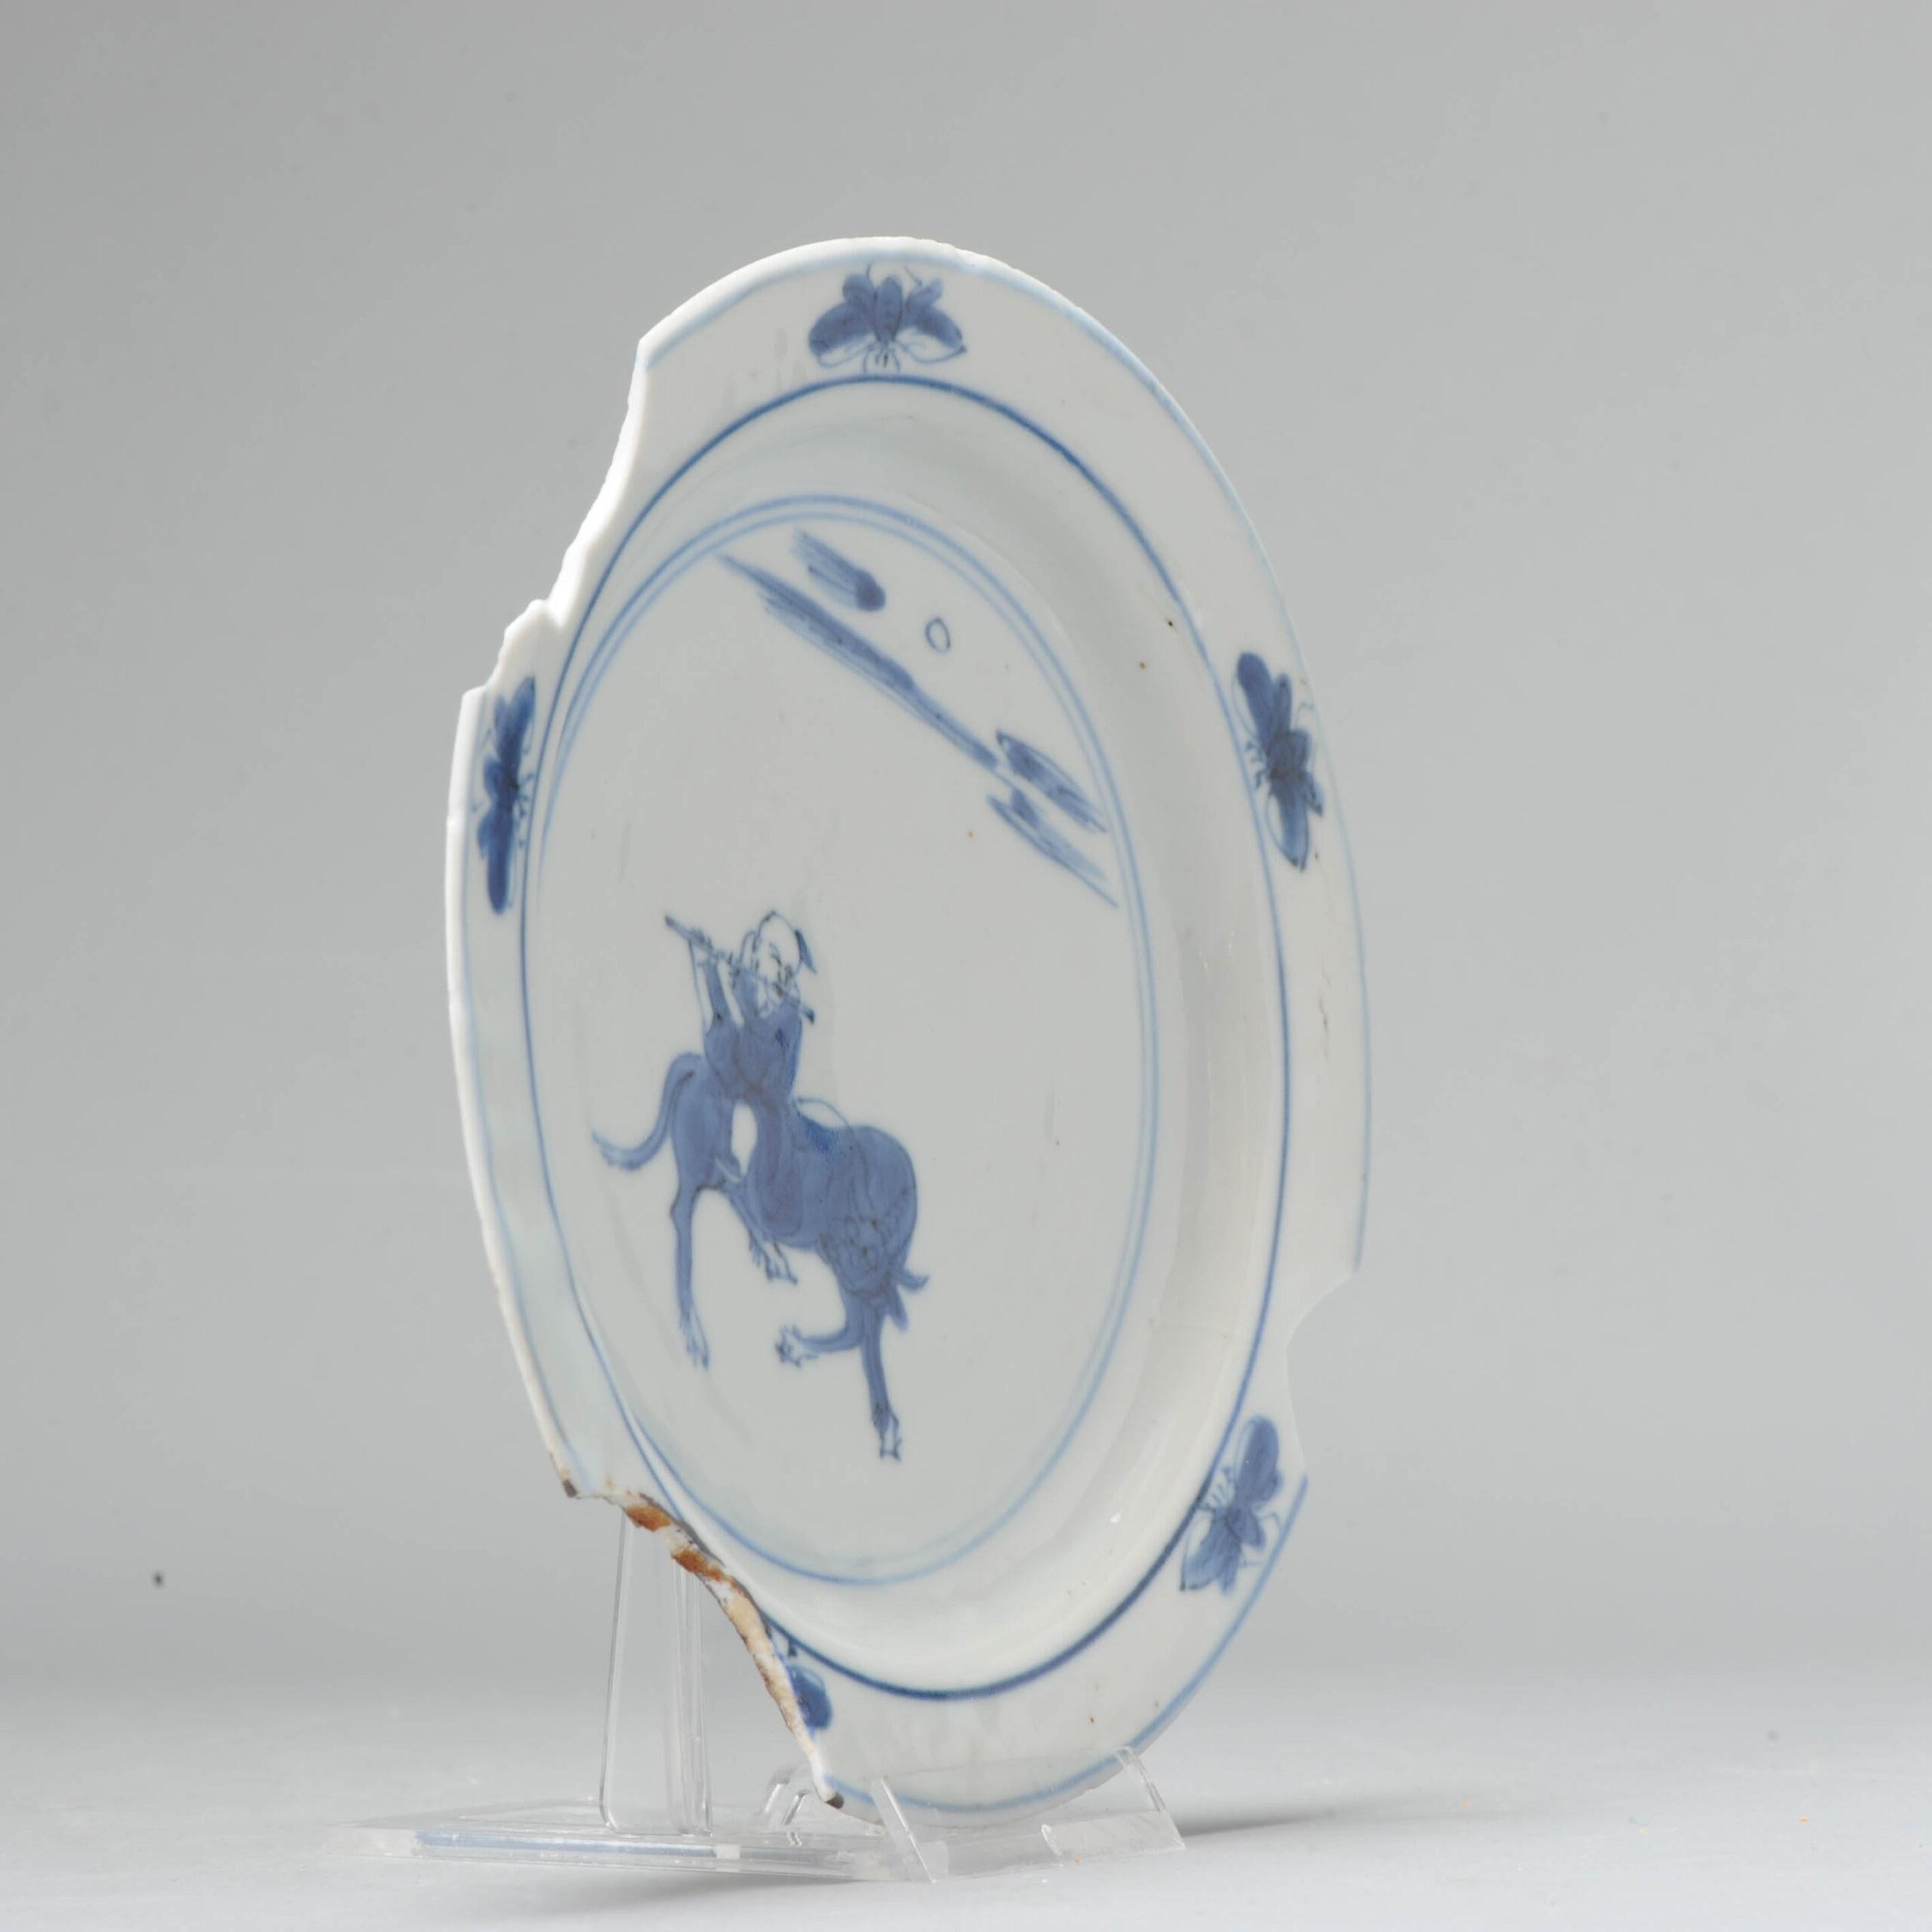 A very nice small dish from the Late ming period, Tianqi or Chongzhen. With a Boy riding an ox and playing the flute.

Ox herdboys riding oxen have been used as a motif in painting and graphic arts to symbolize the ability of the mind to control the